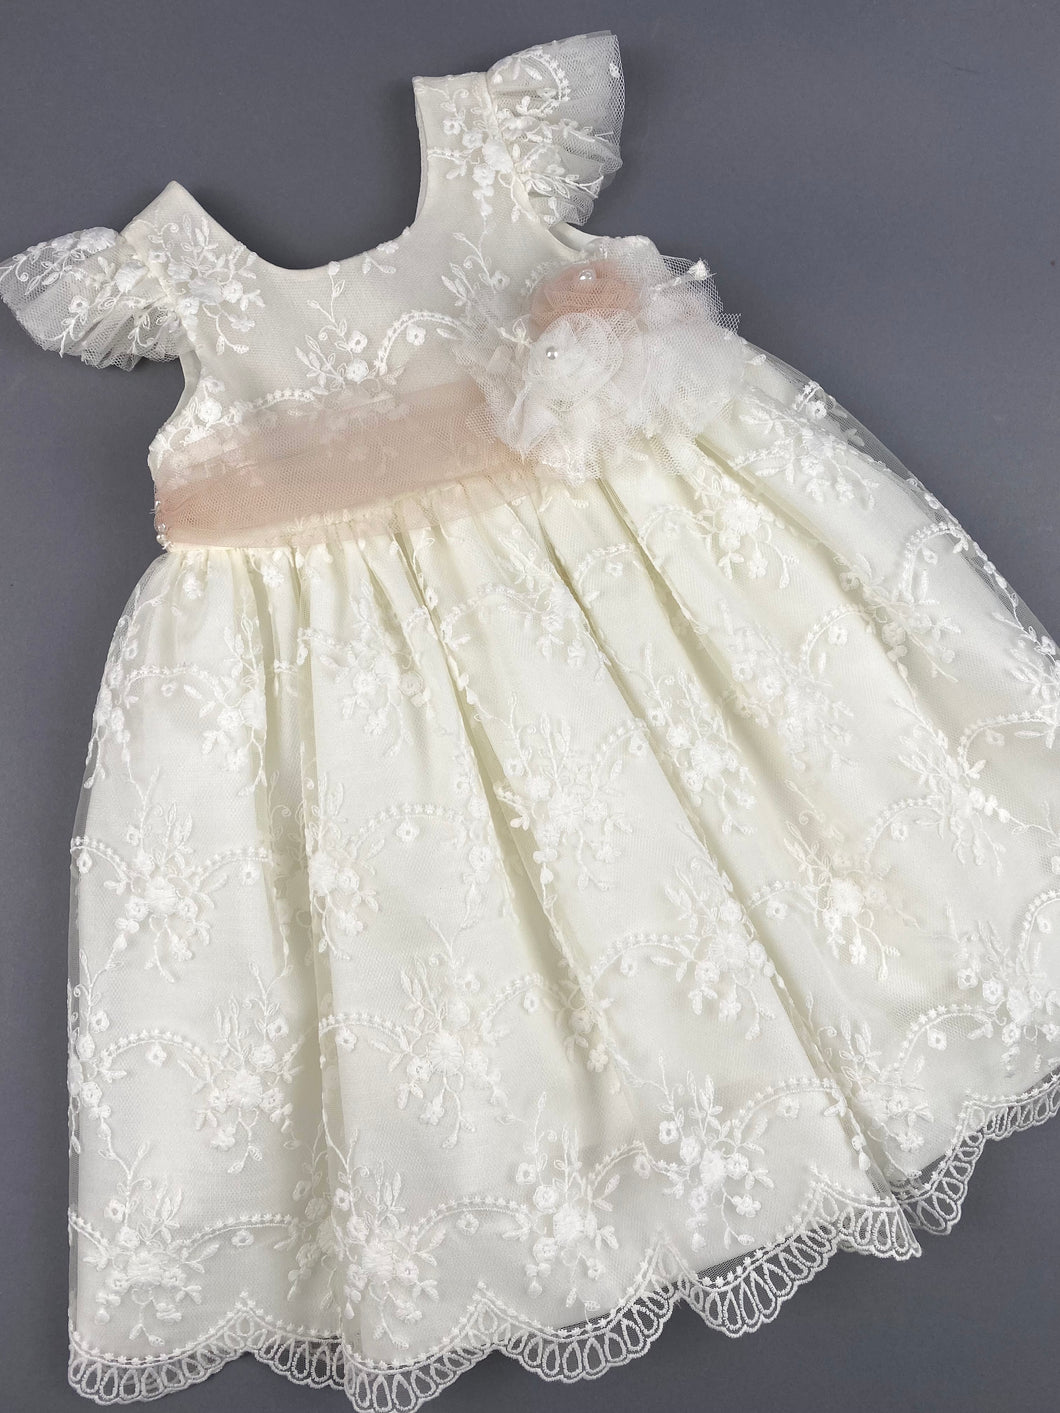 Dress 57 Girls Baptismal Christening Cap Leave French Lace Dress, with matching Bolero and Hat. Made in Greece exclusively for Rosies Collections.